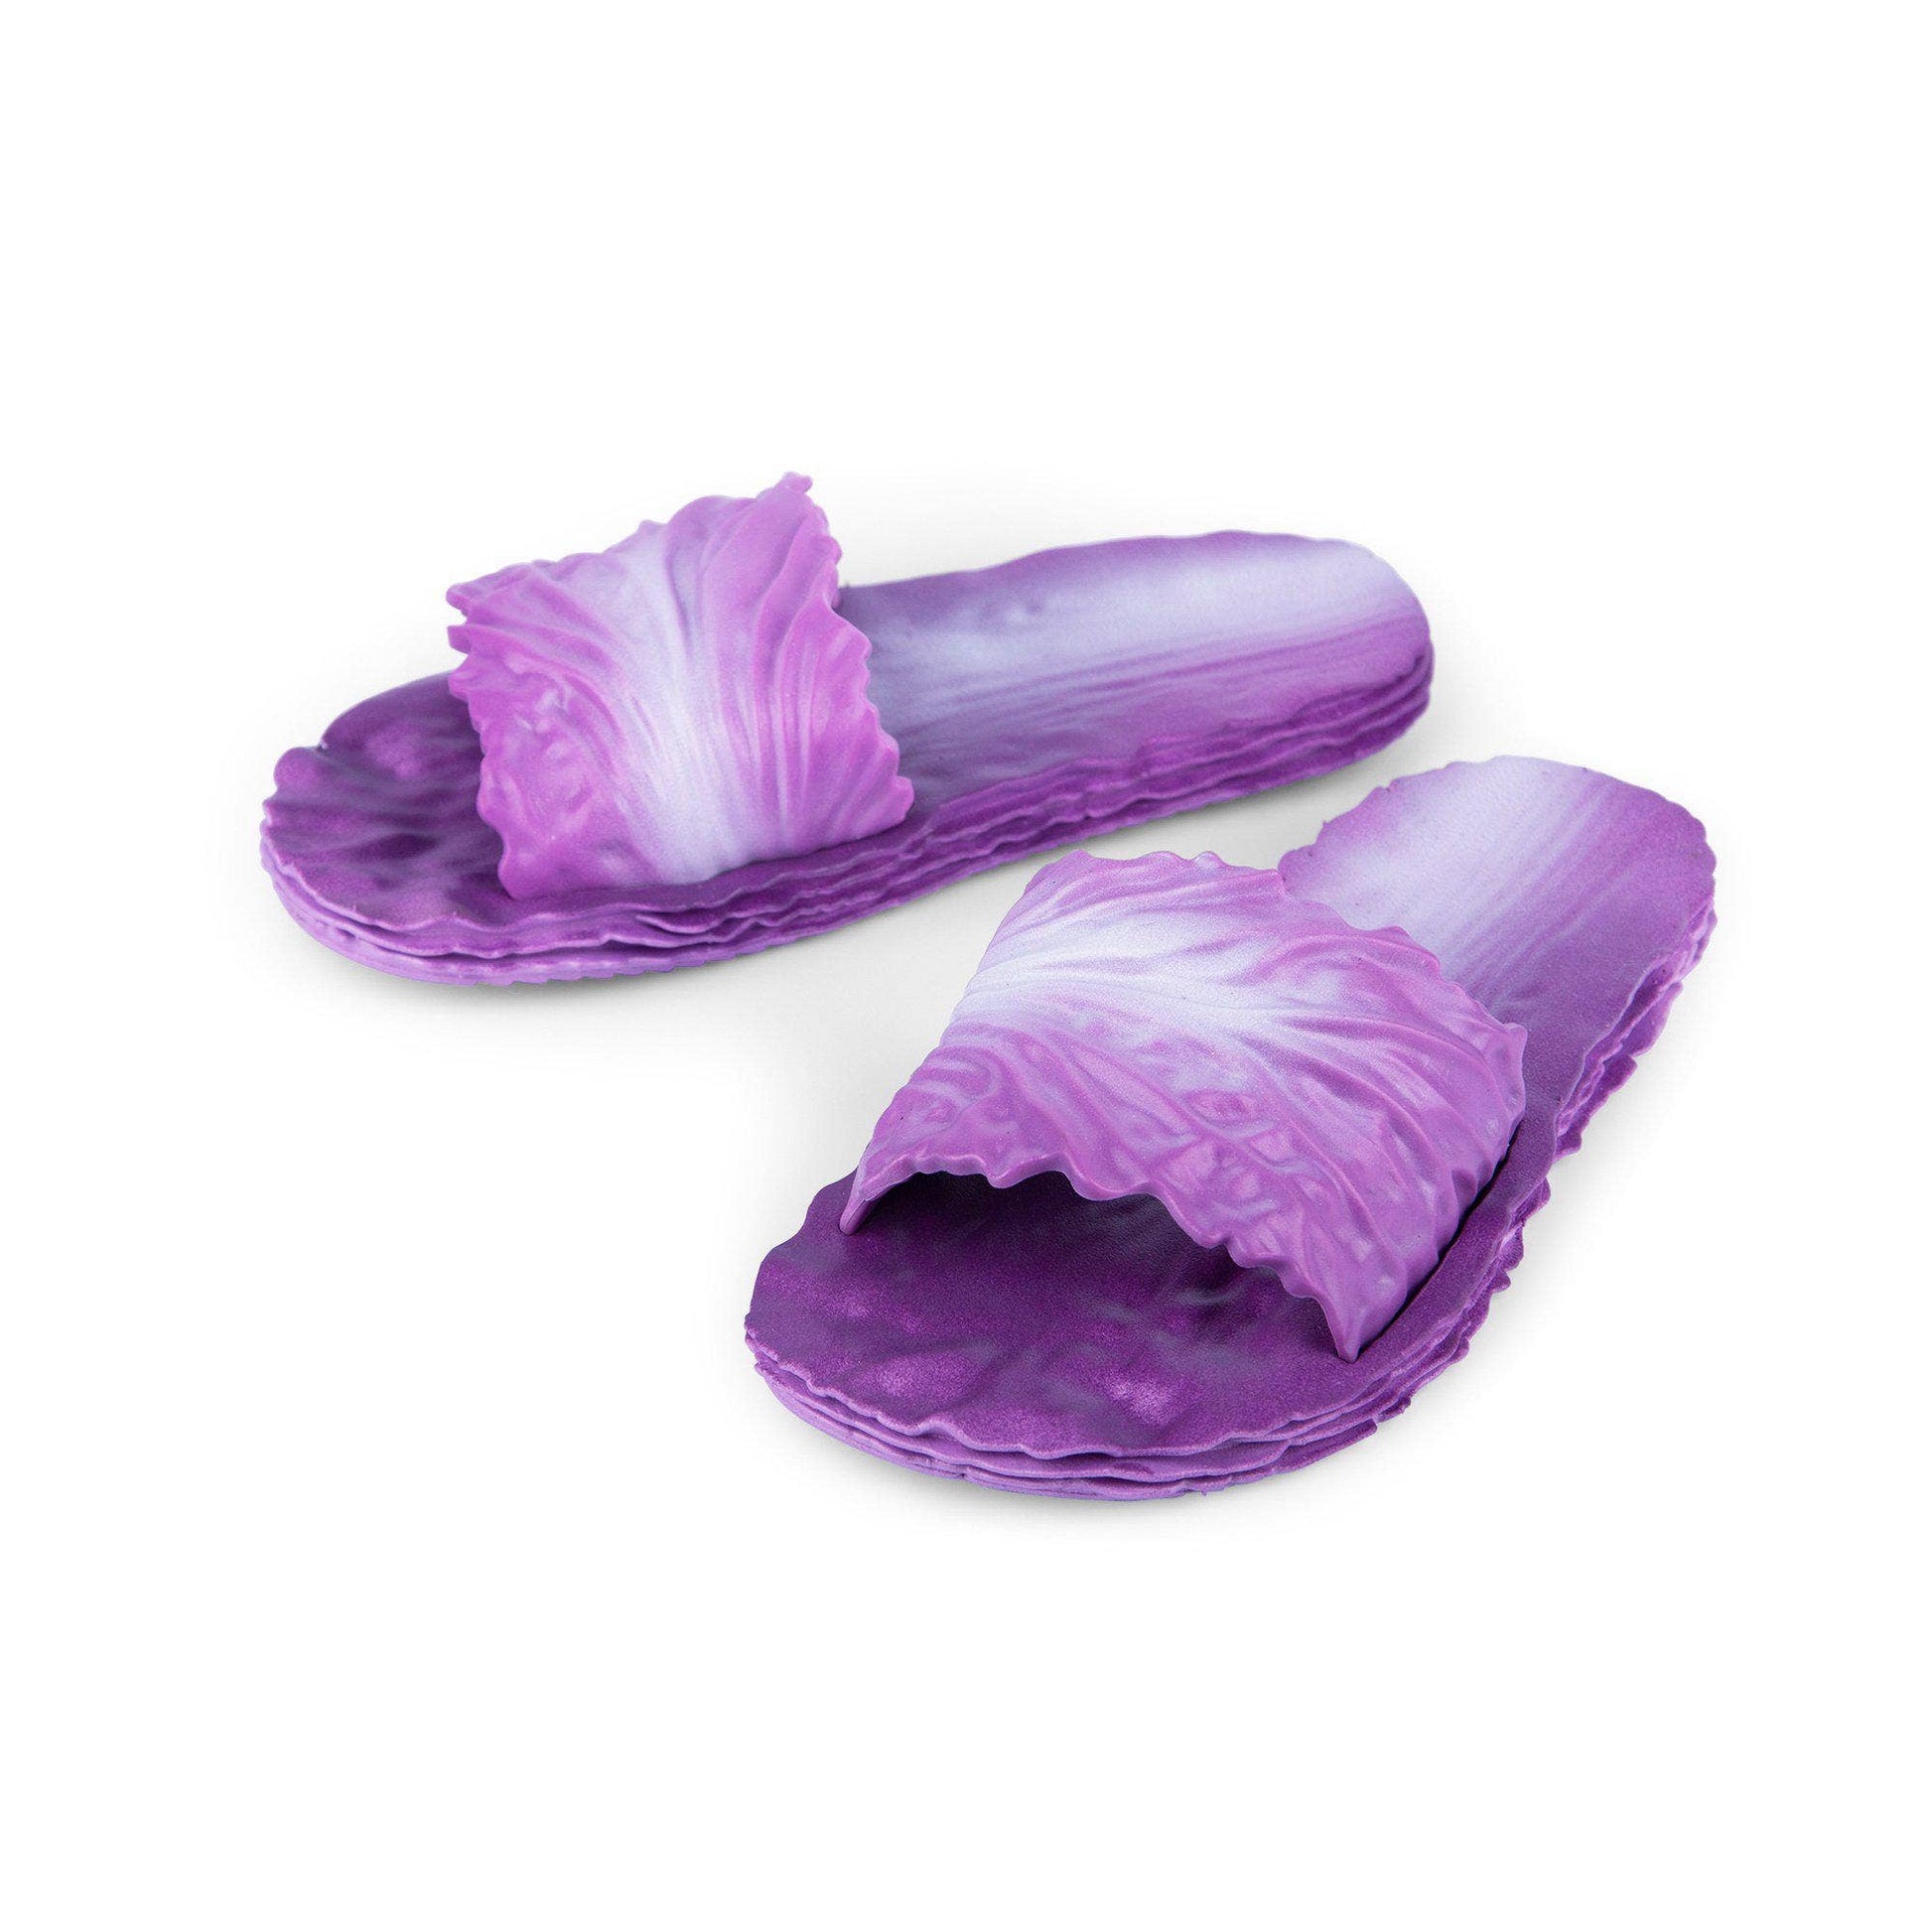 Slide slippers in the color and texture of purple cabbage